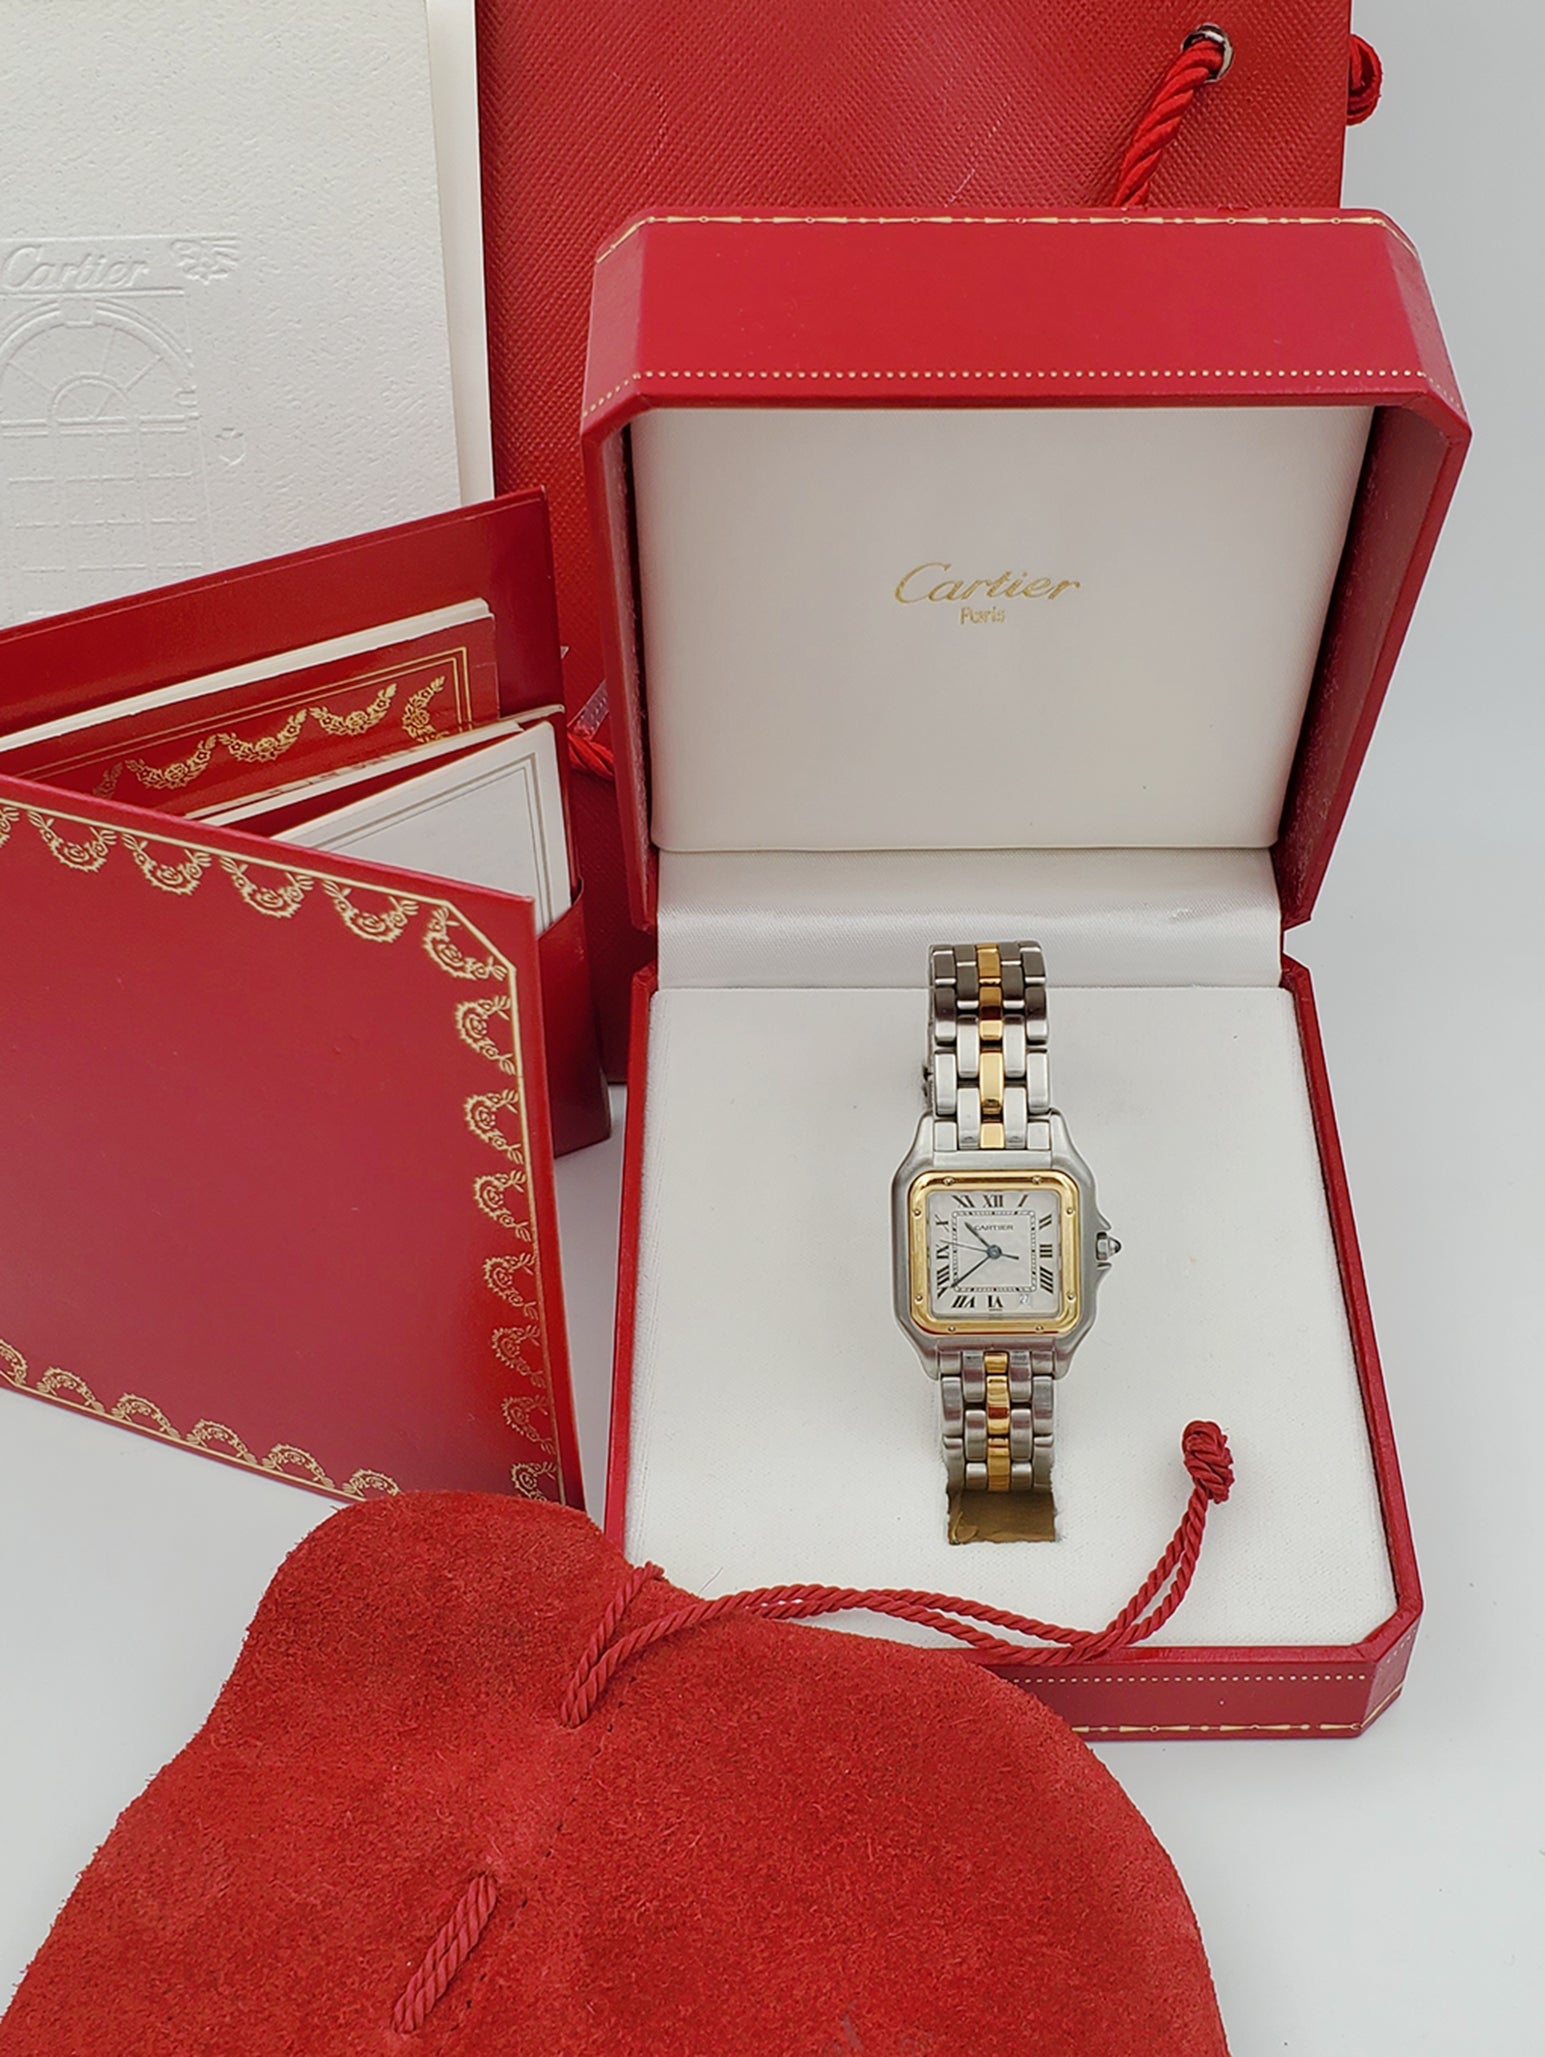 Ladies Medium Cartier Panthere Two Tone Watch with 18K Yellow Gold / Stainless Steel and White Dial. (Pre-Owned W25028B5)